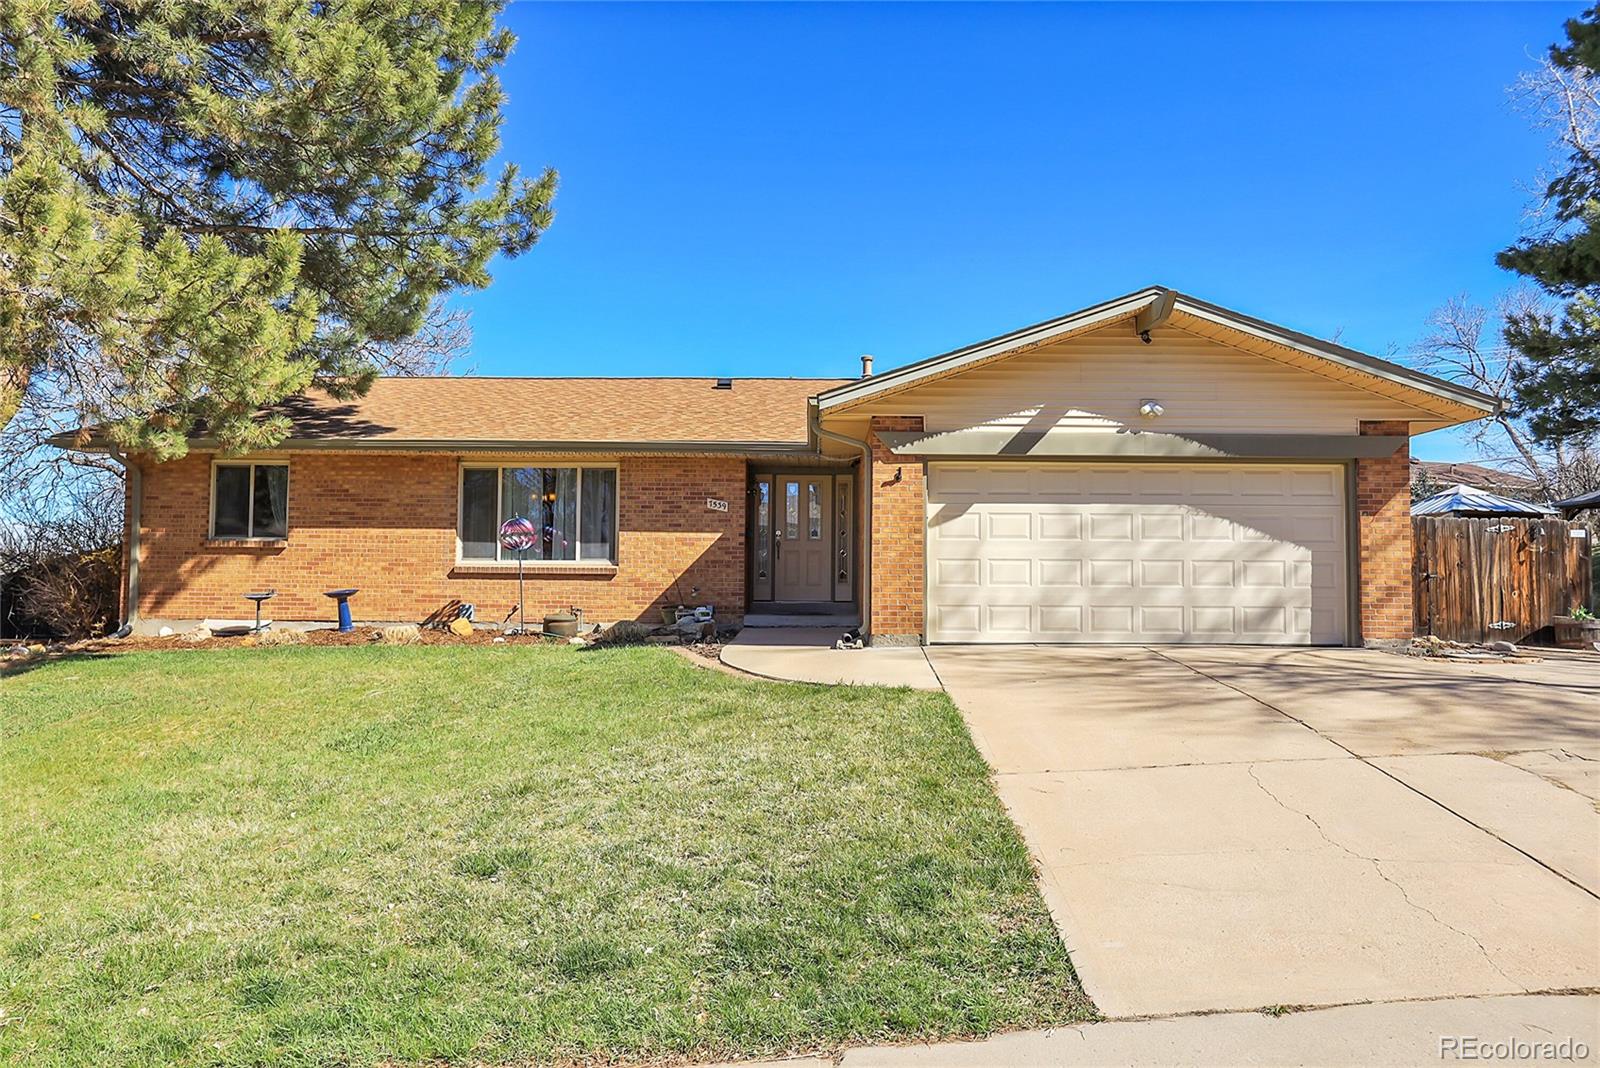 7539 e easter place, centennial sold home. Closed on 2024-04-30 for $682,000.